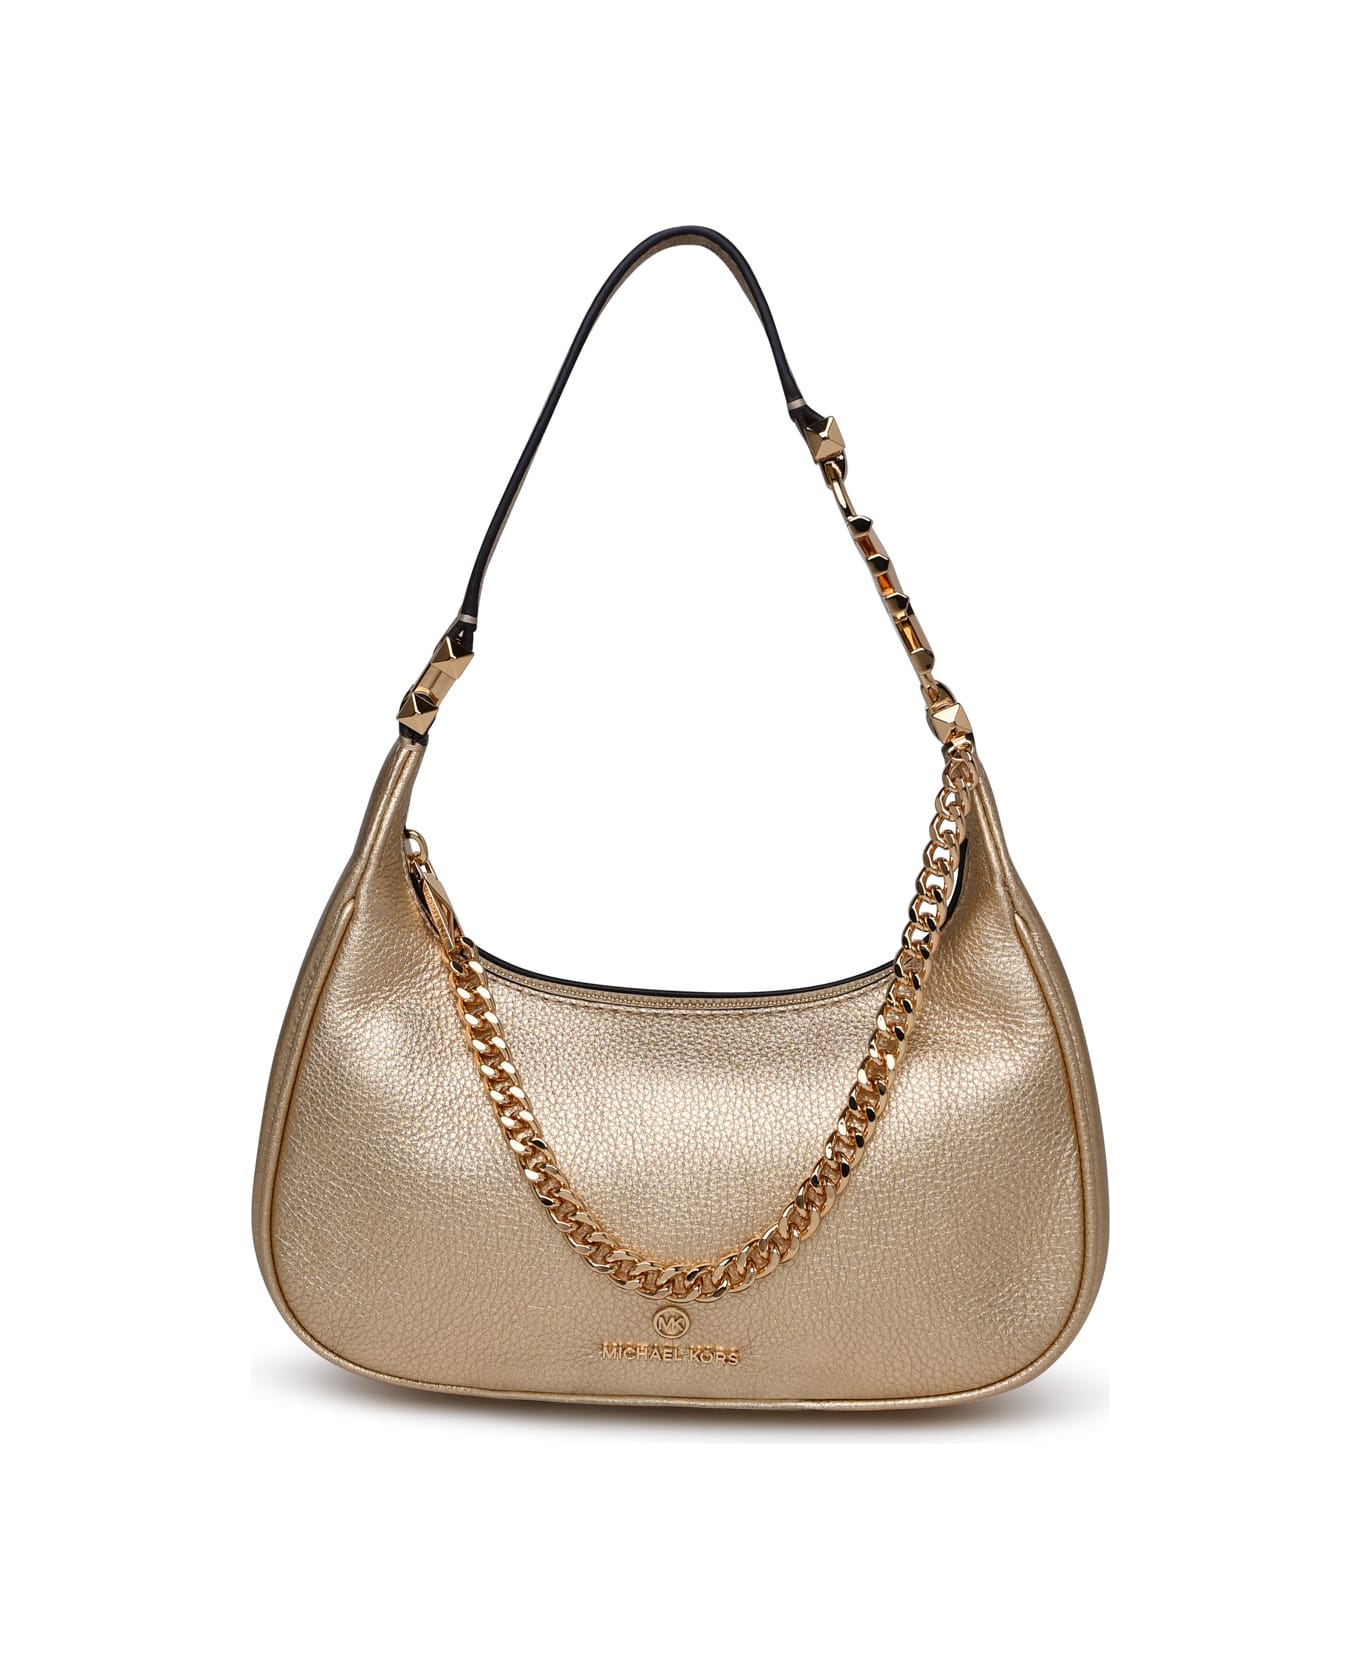 Michael Kors Piper Leather Bag - Gold トートバッグ